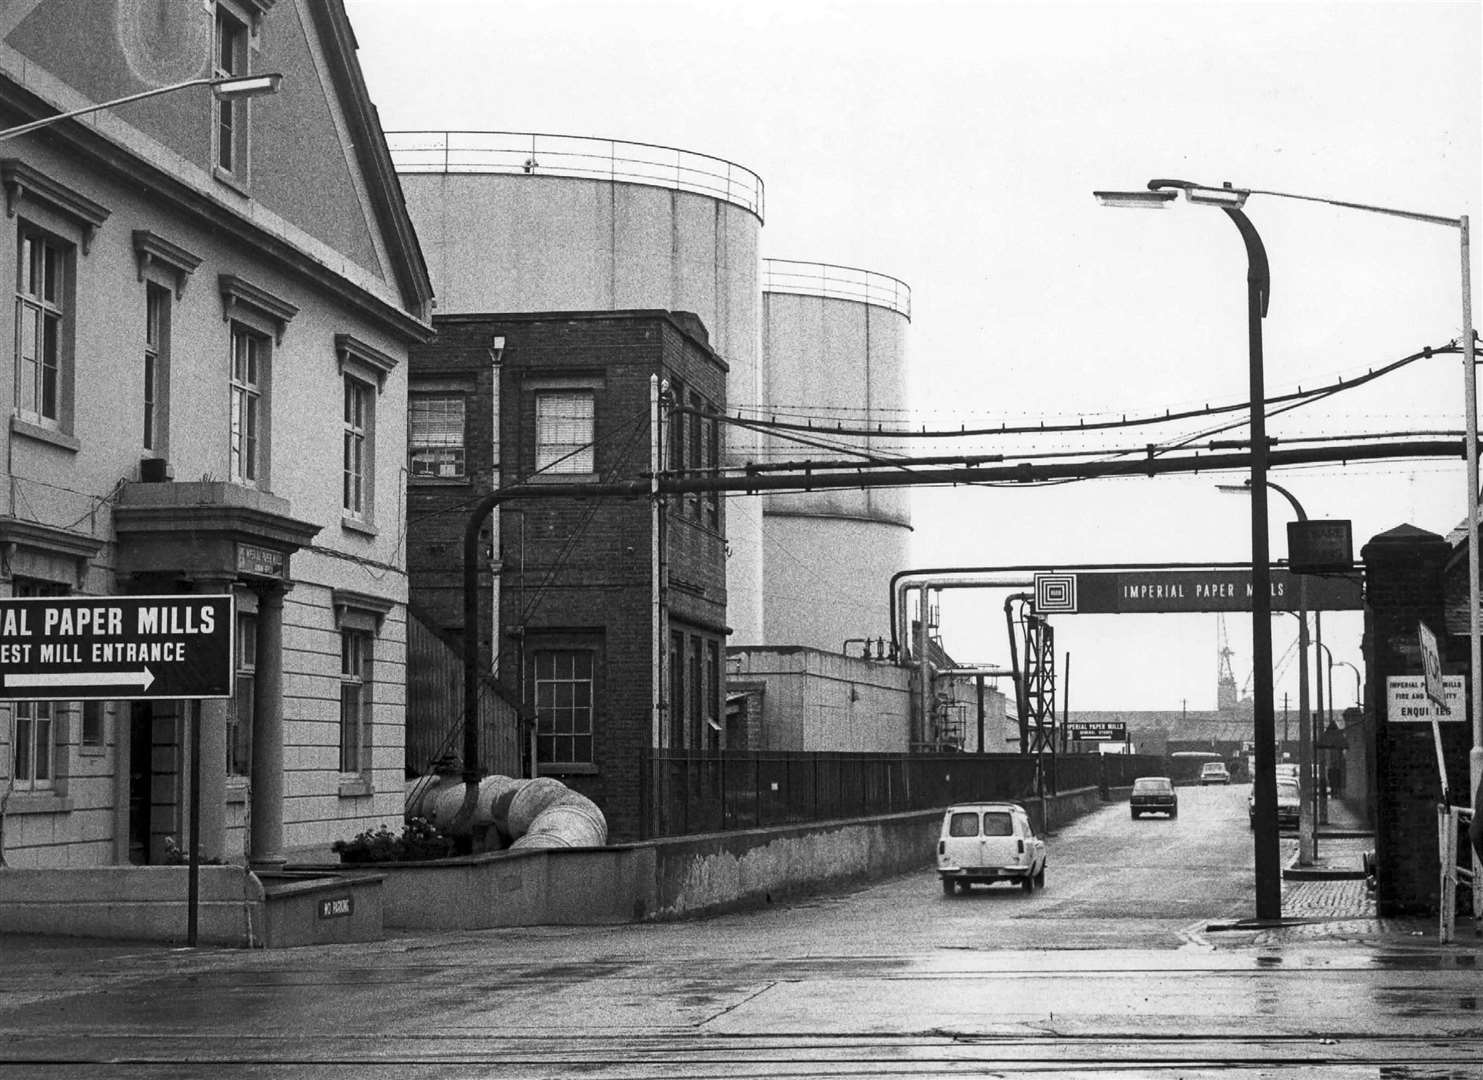 The Imperial Paper Mills at Gravesend in 1976 - just five years before it was closed for good